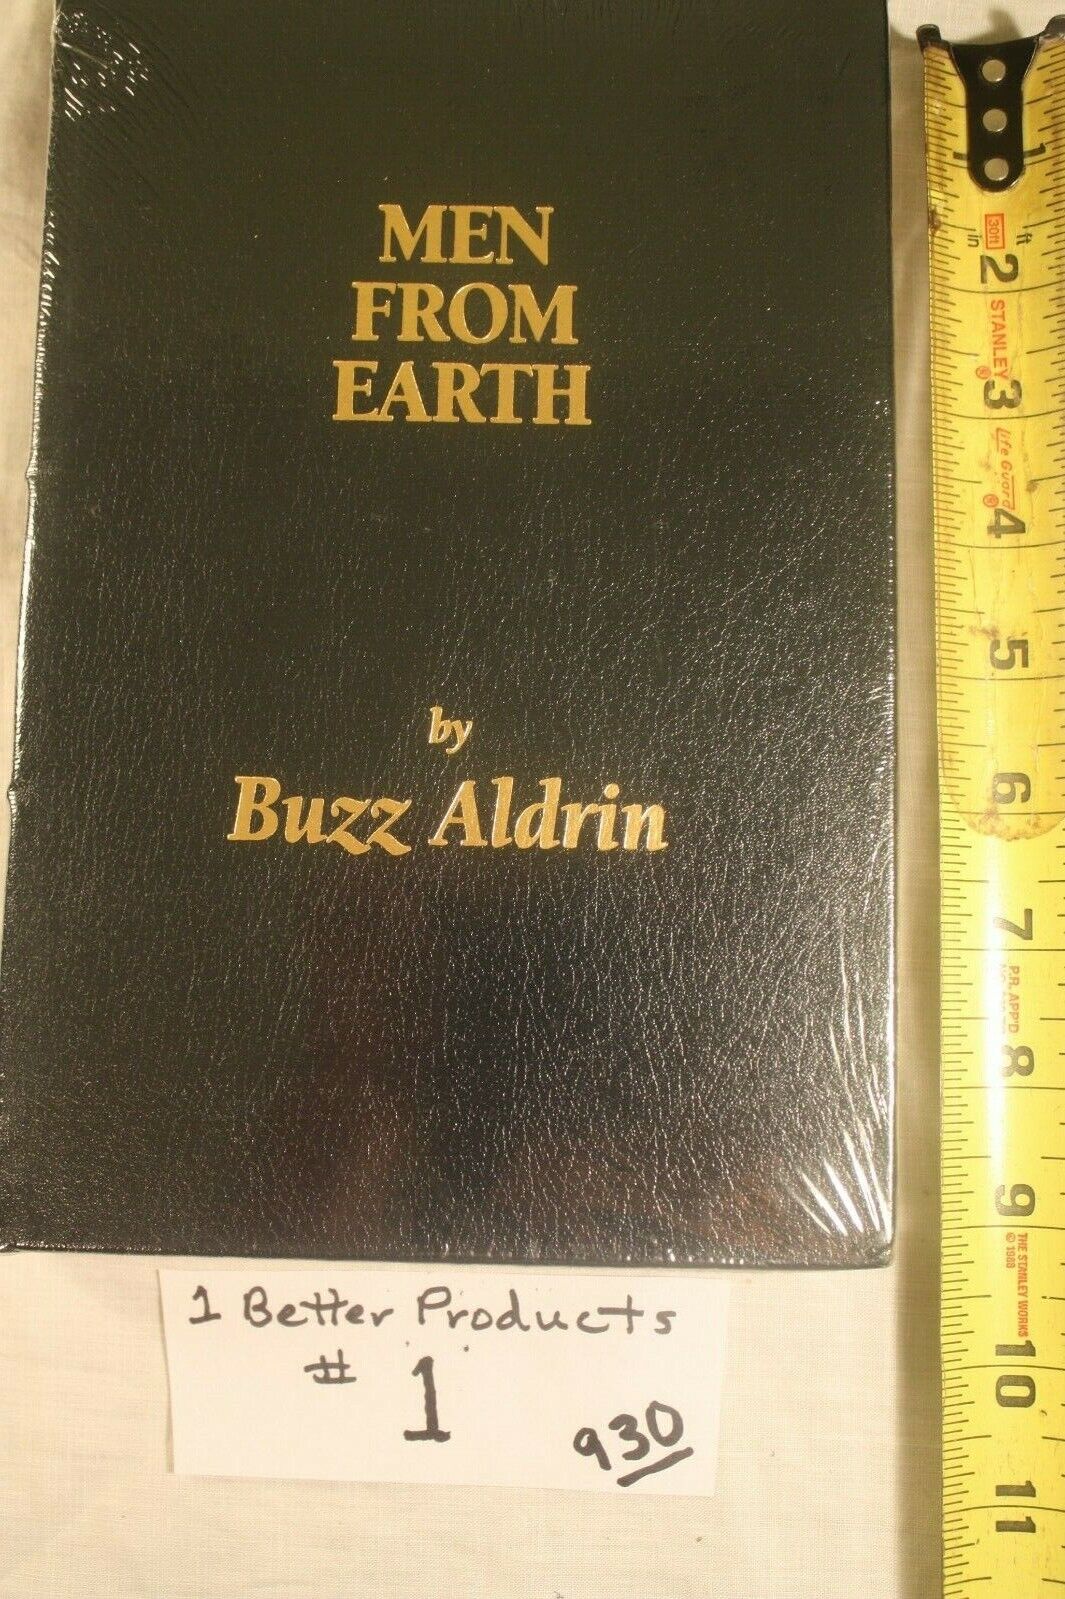 Buzz Aldrin  ASTRONAUT Signed LE Leather Book - Men From Earth - Sealed   #930